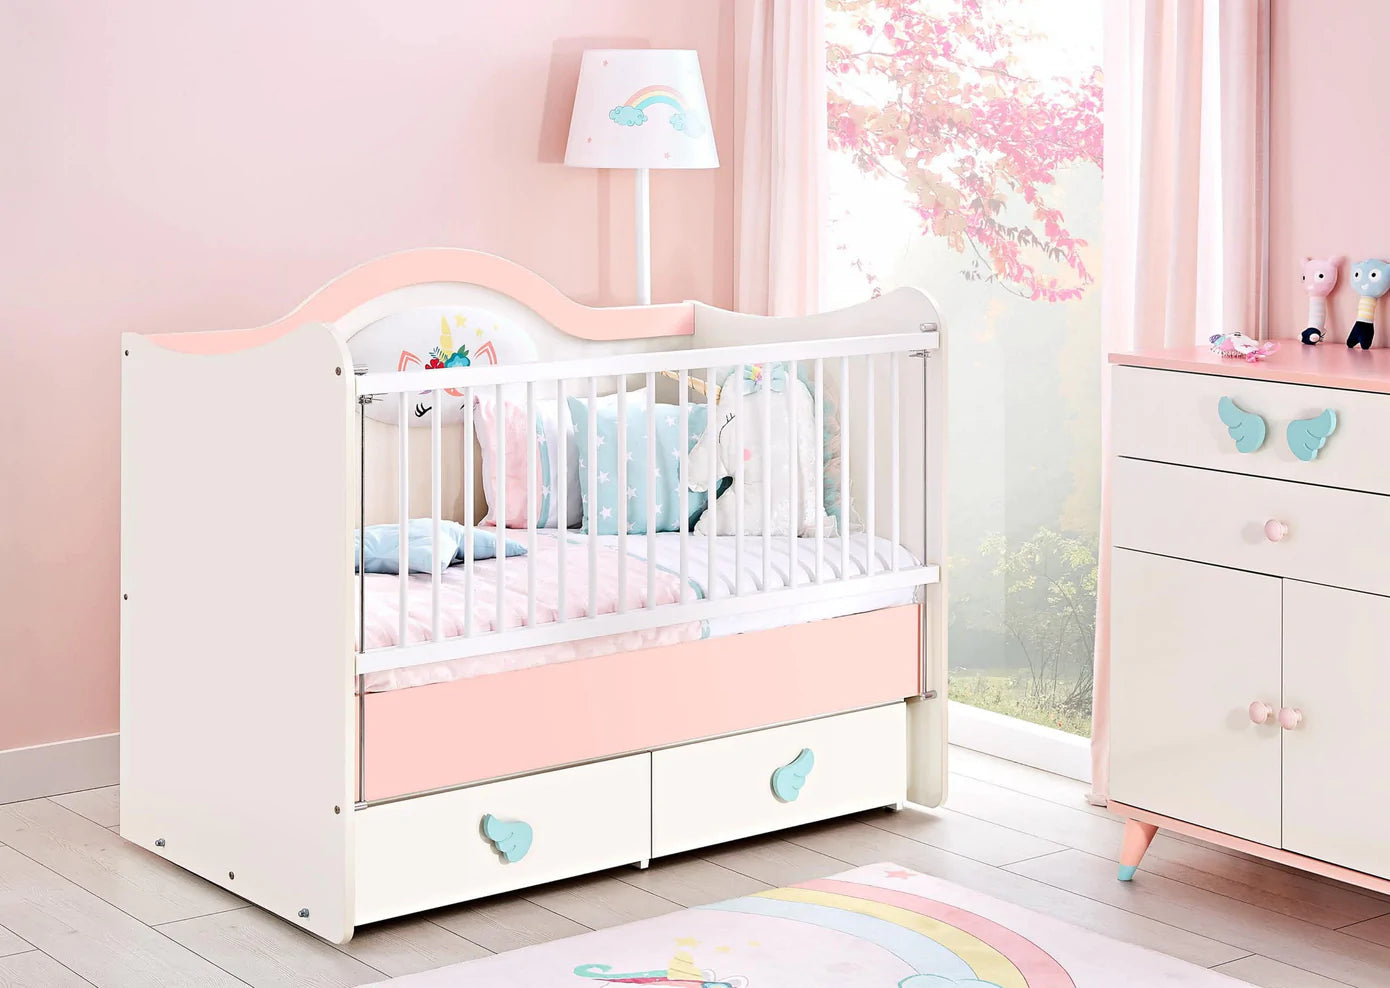 What Should Be Considered When Choosing a Baby Room?